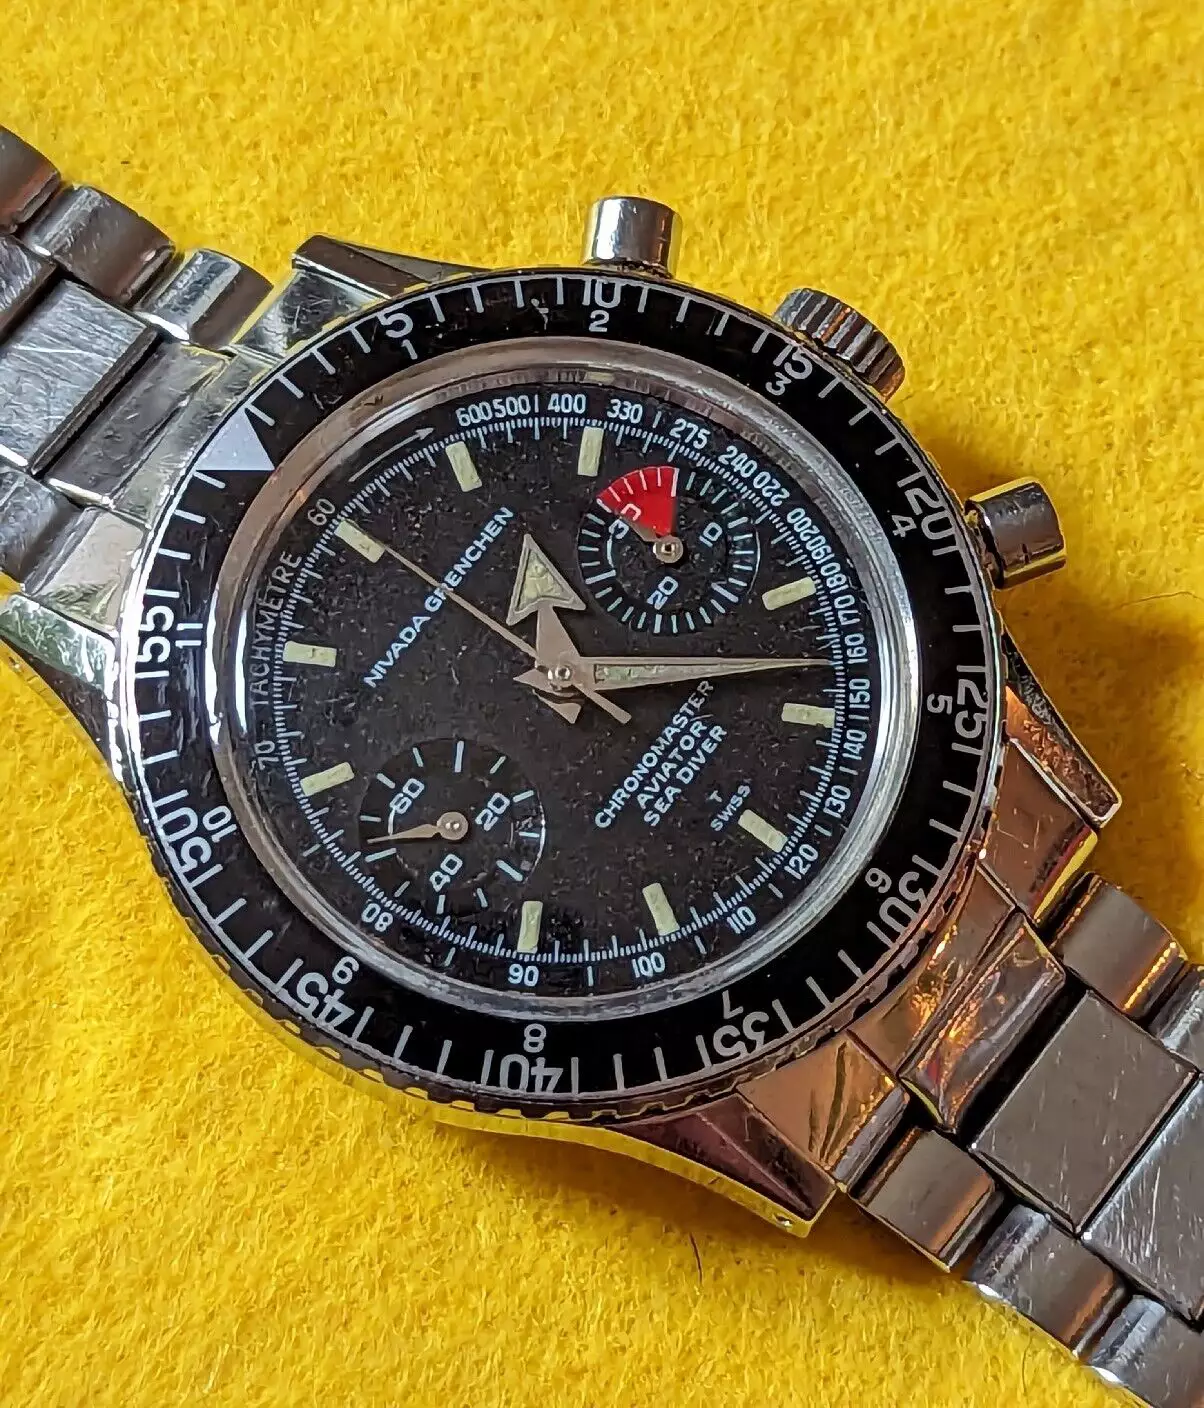 eBay Finds: NOS Full Kits, Classic Divers, & Unknown Chronos